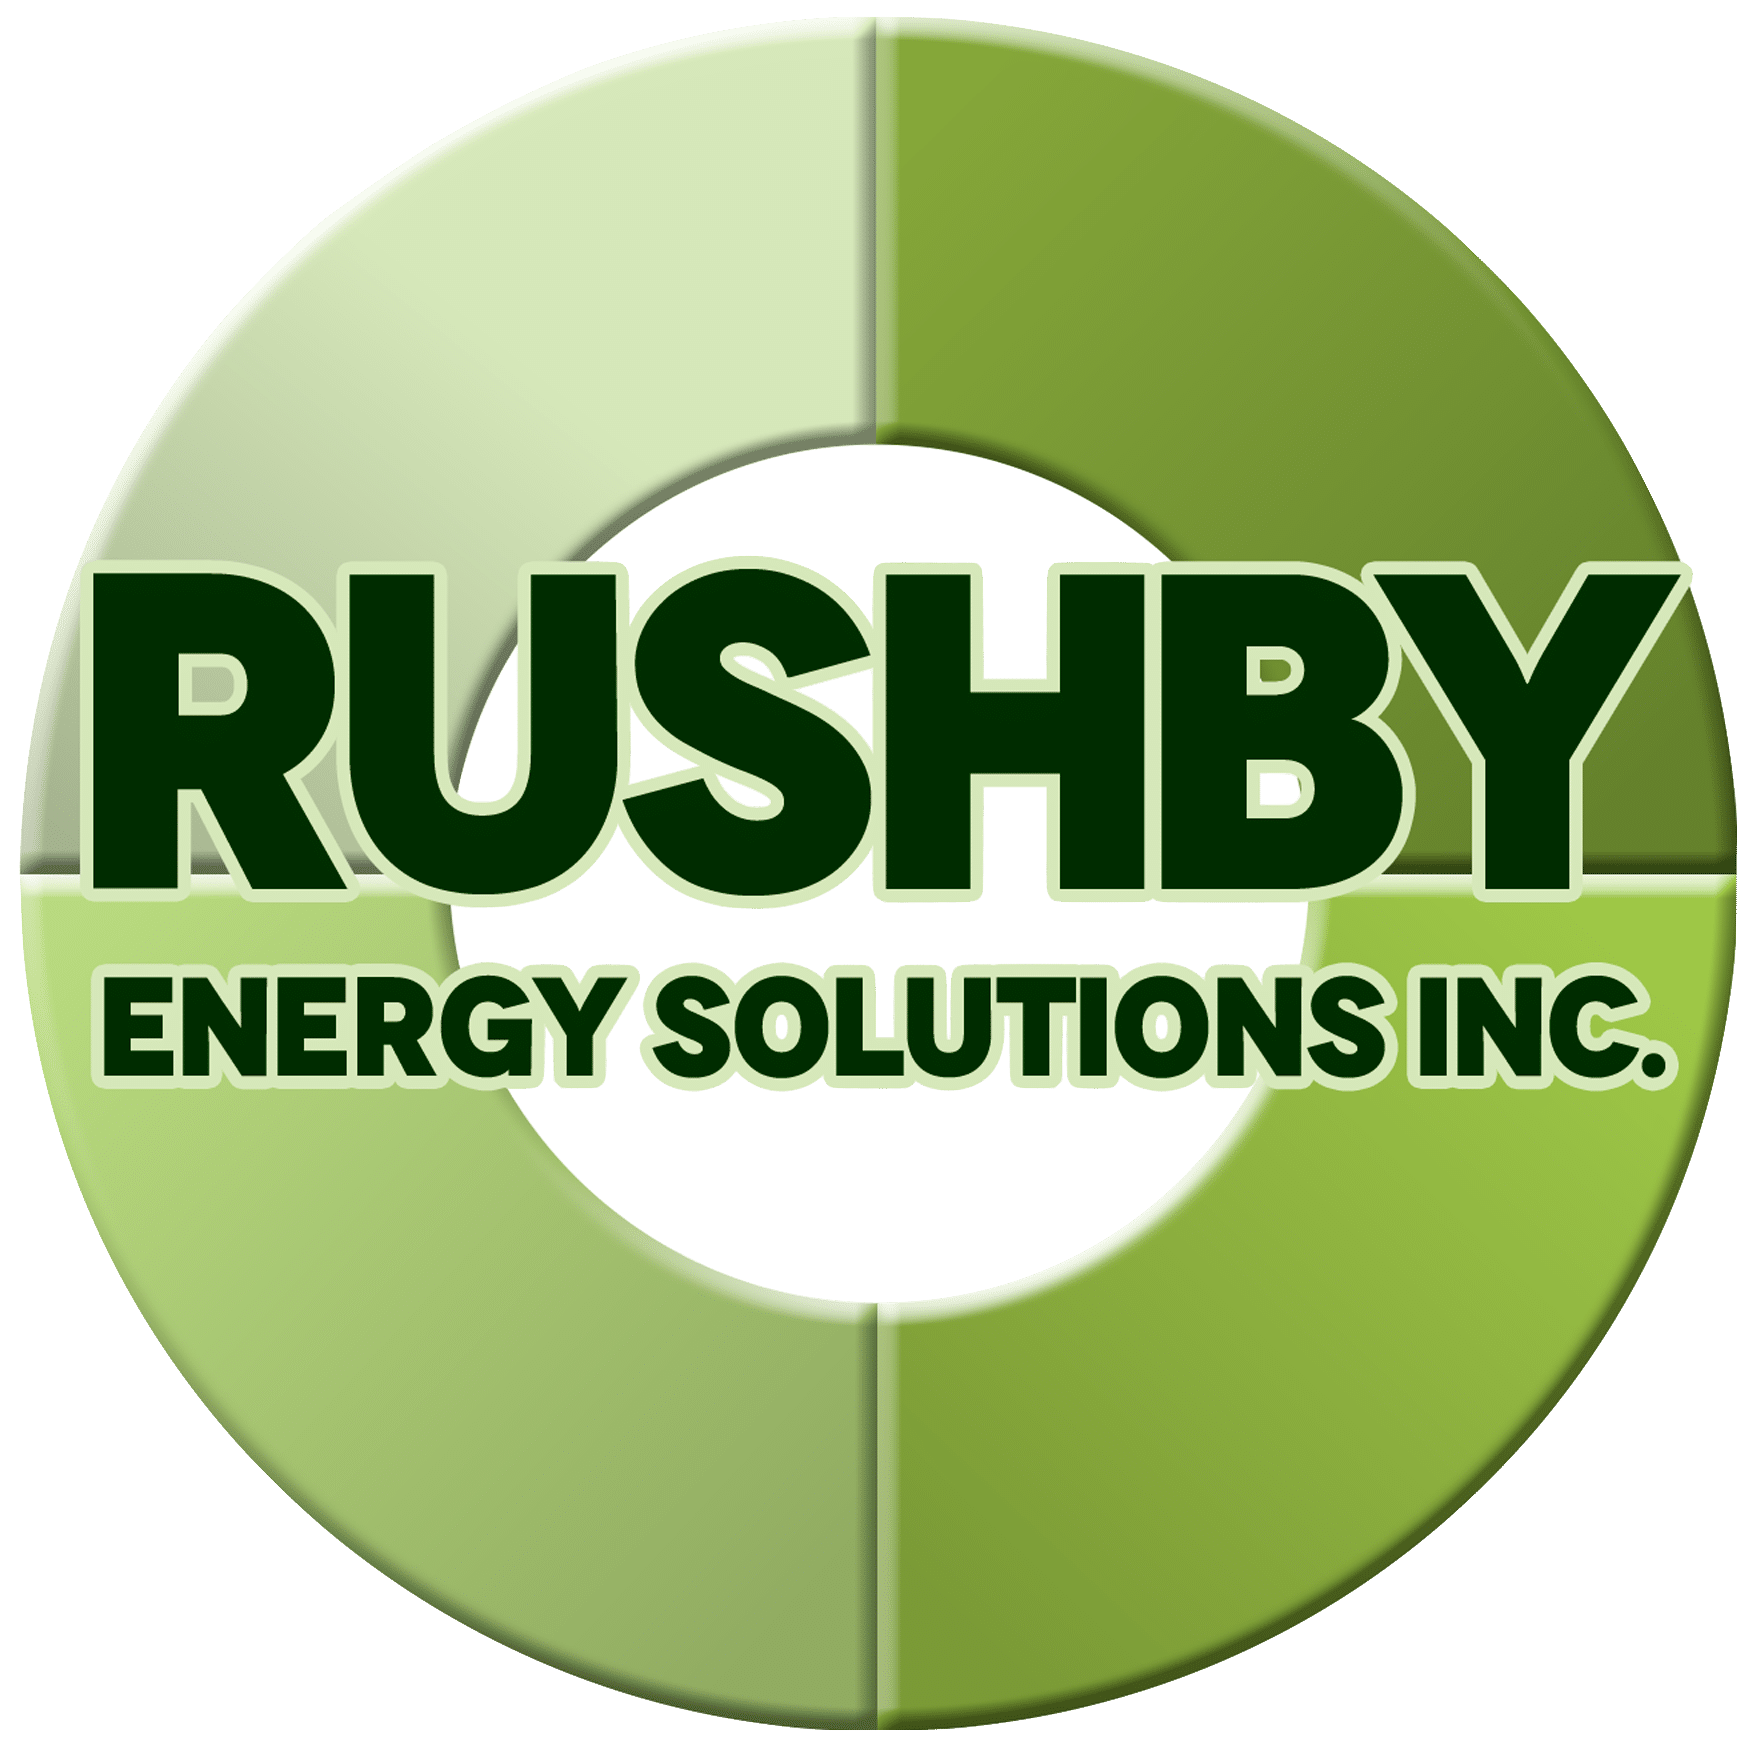 Rushby Energy Solutions